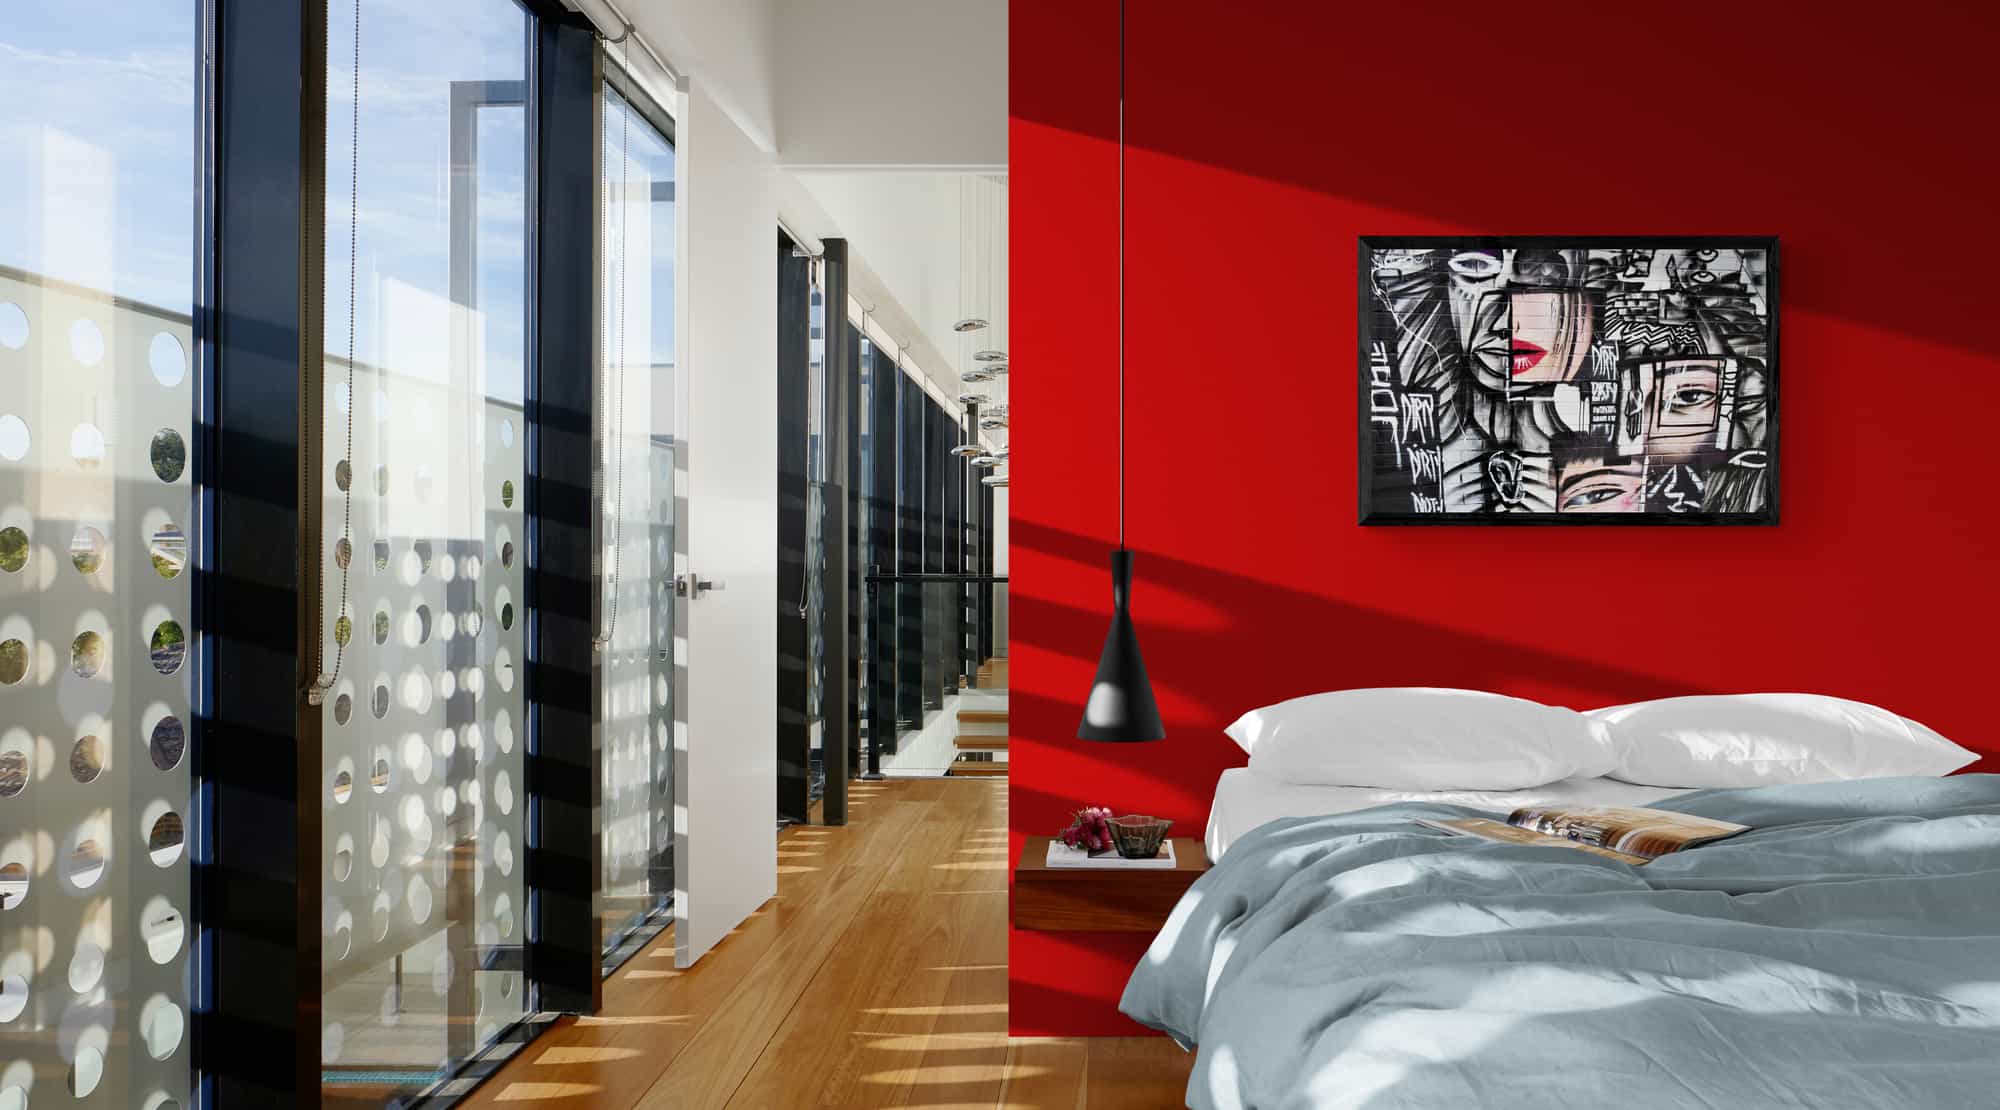 a image of a stylish apartment bedroom with large windows and Milton Wes Art framed canvas print hanging on the wall